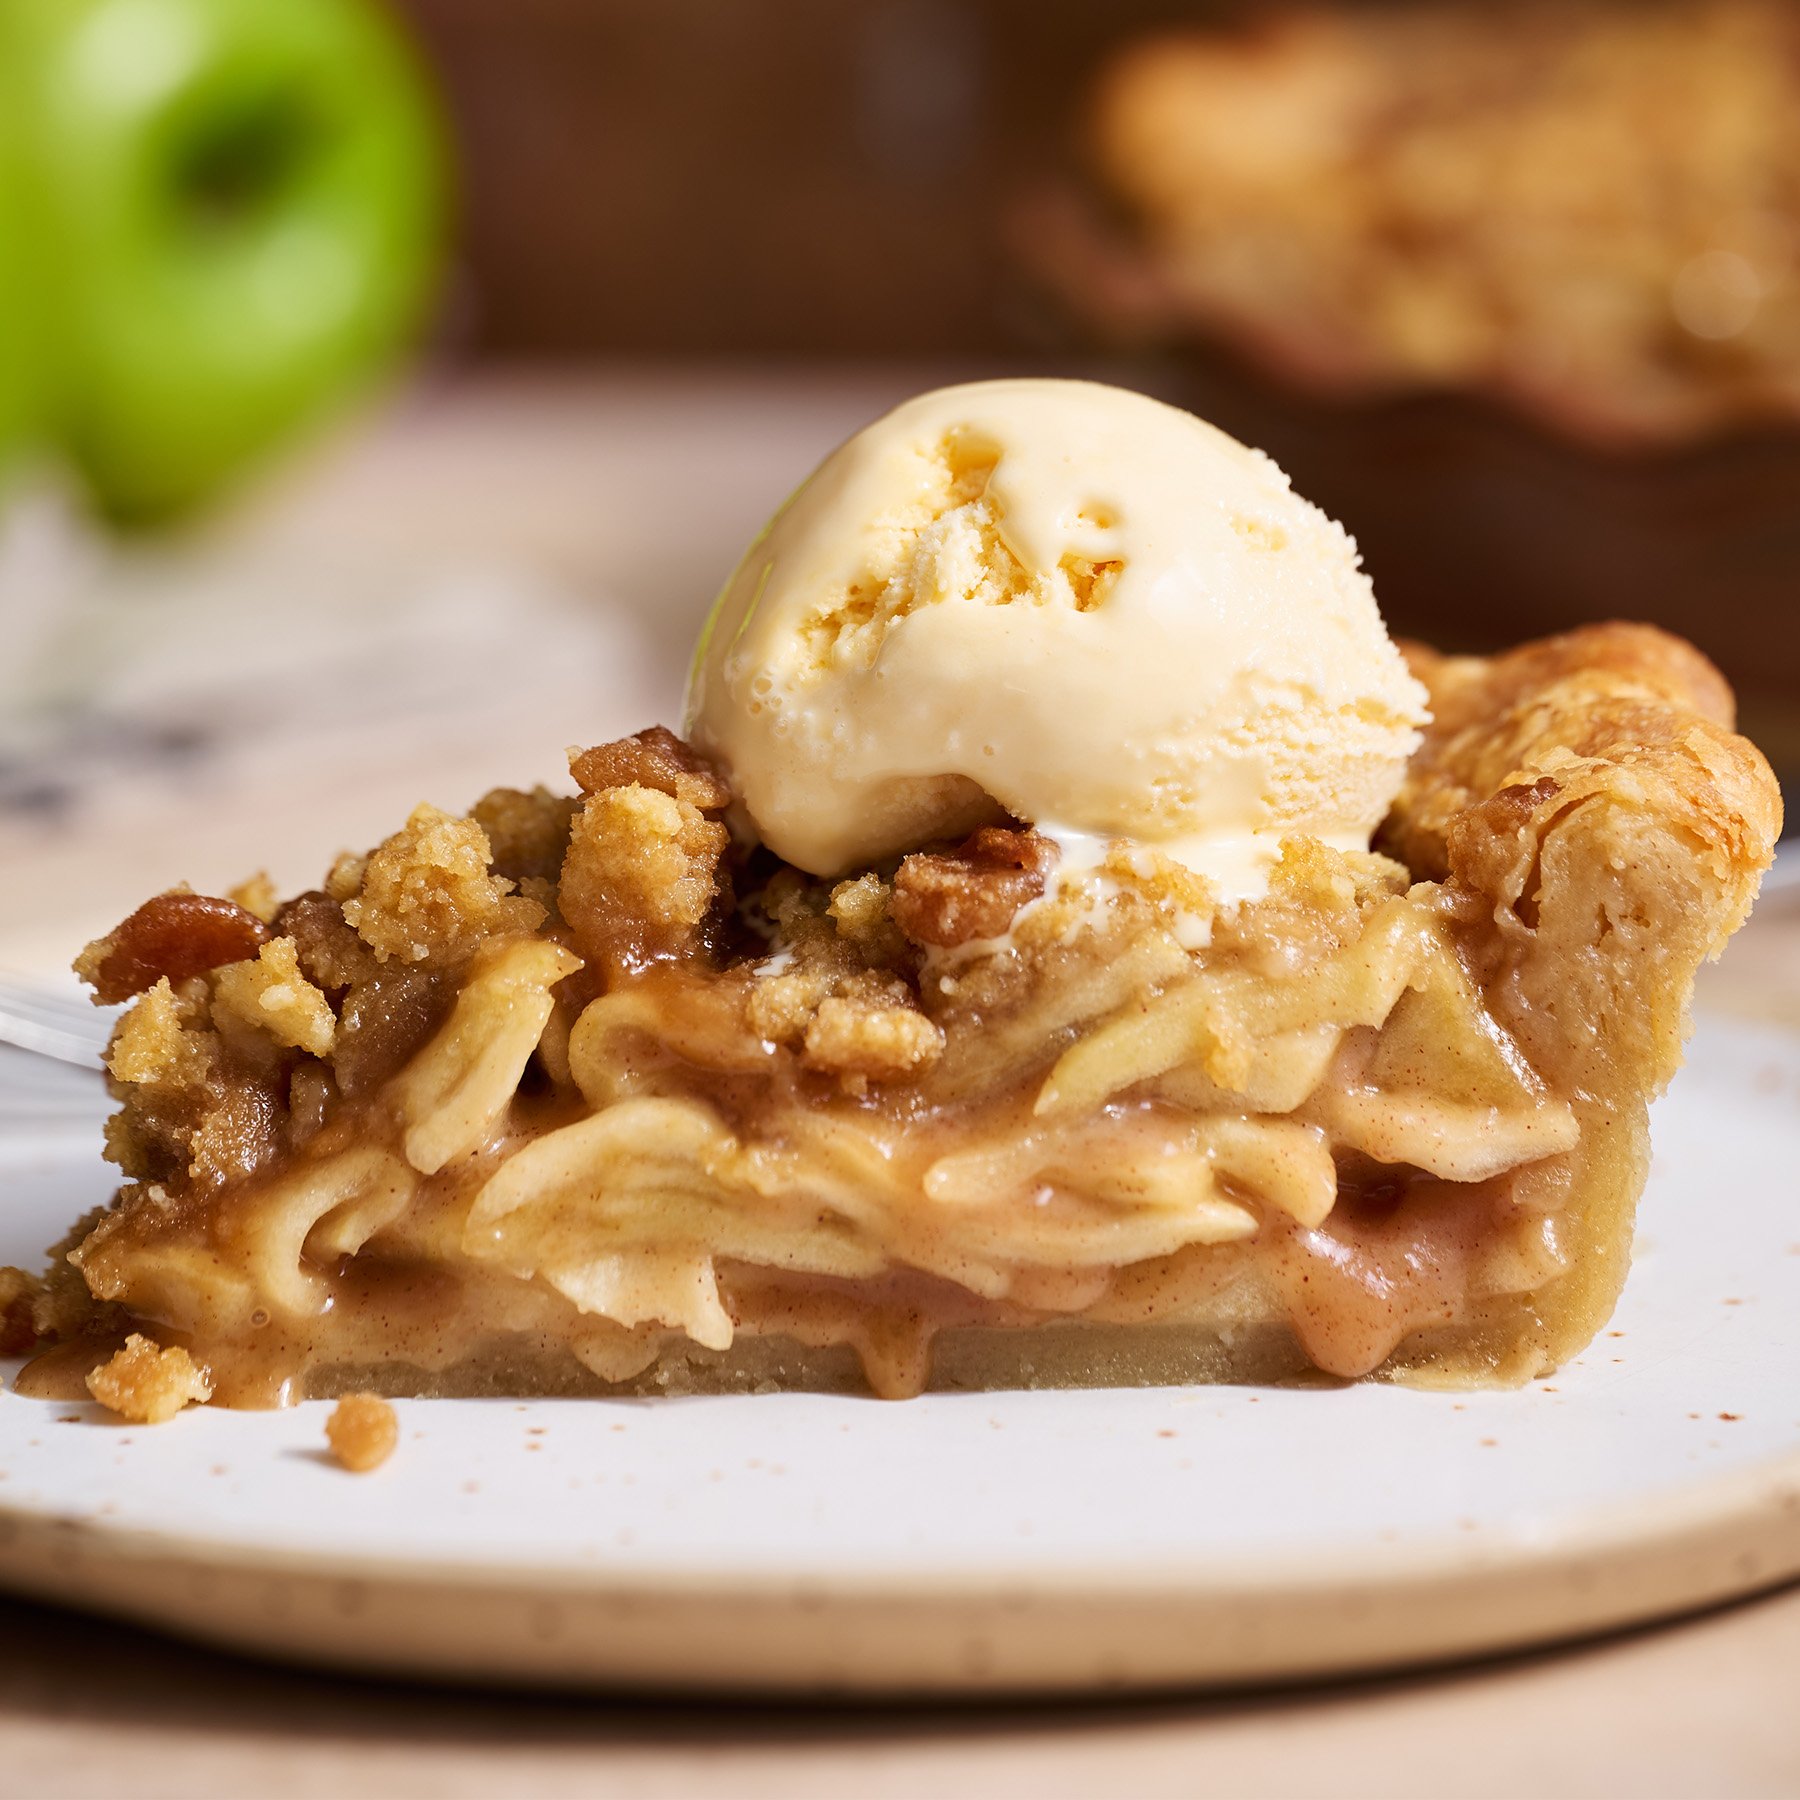 slice of homemade apple streusel pie on a plate with a scoop of vanilla ice cream on top